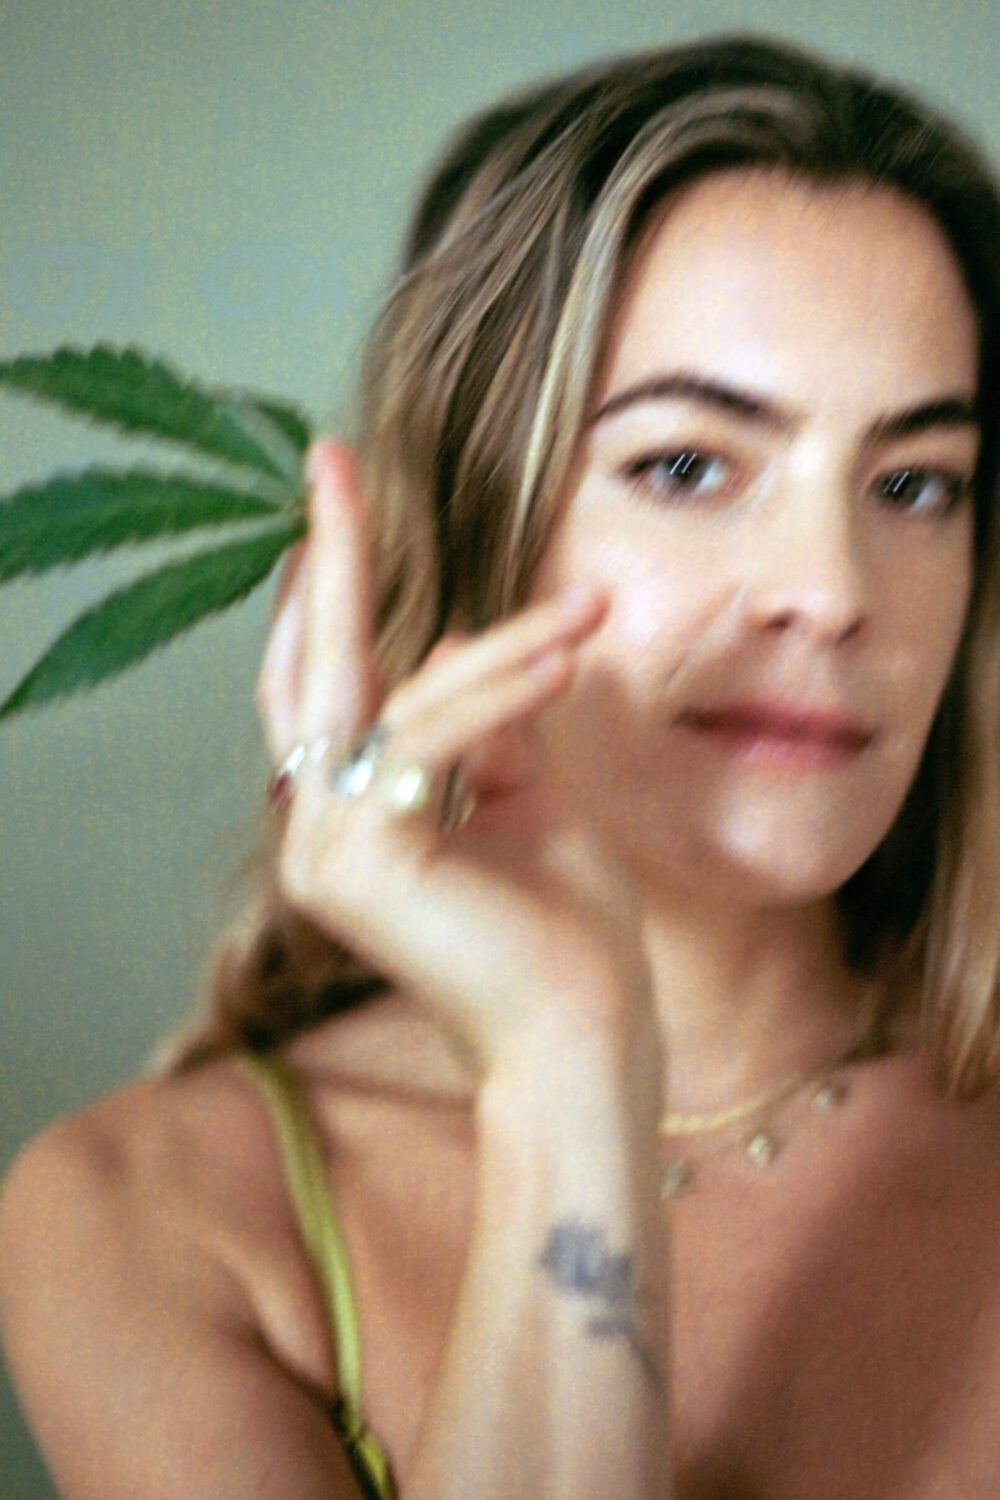 CBD activist Chelsea Leyland is photographed for Semaine